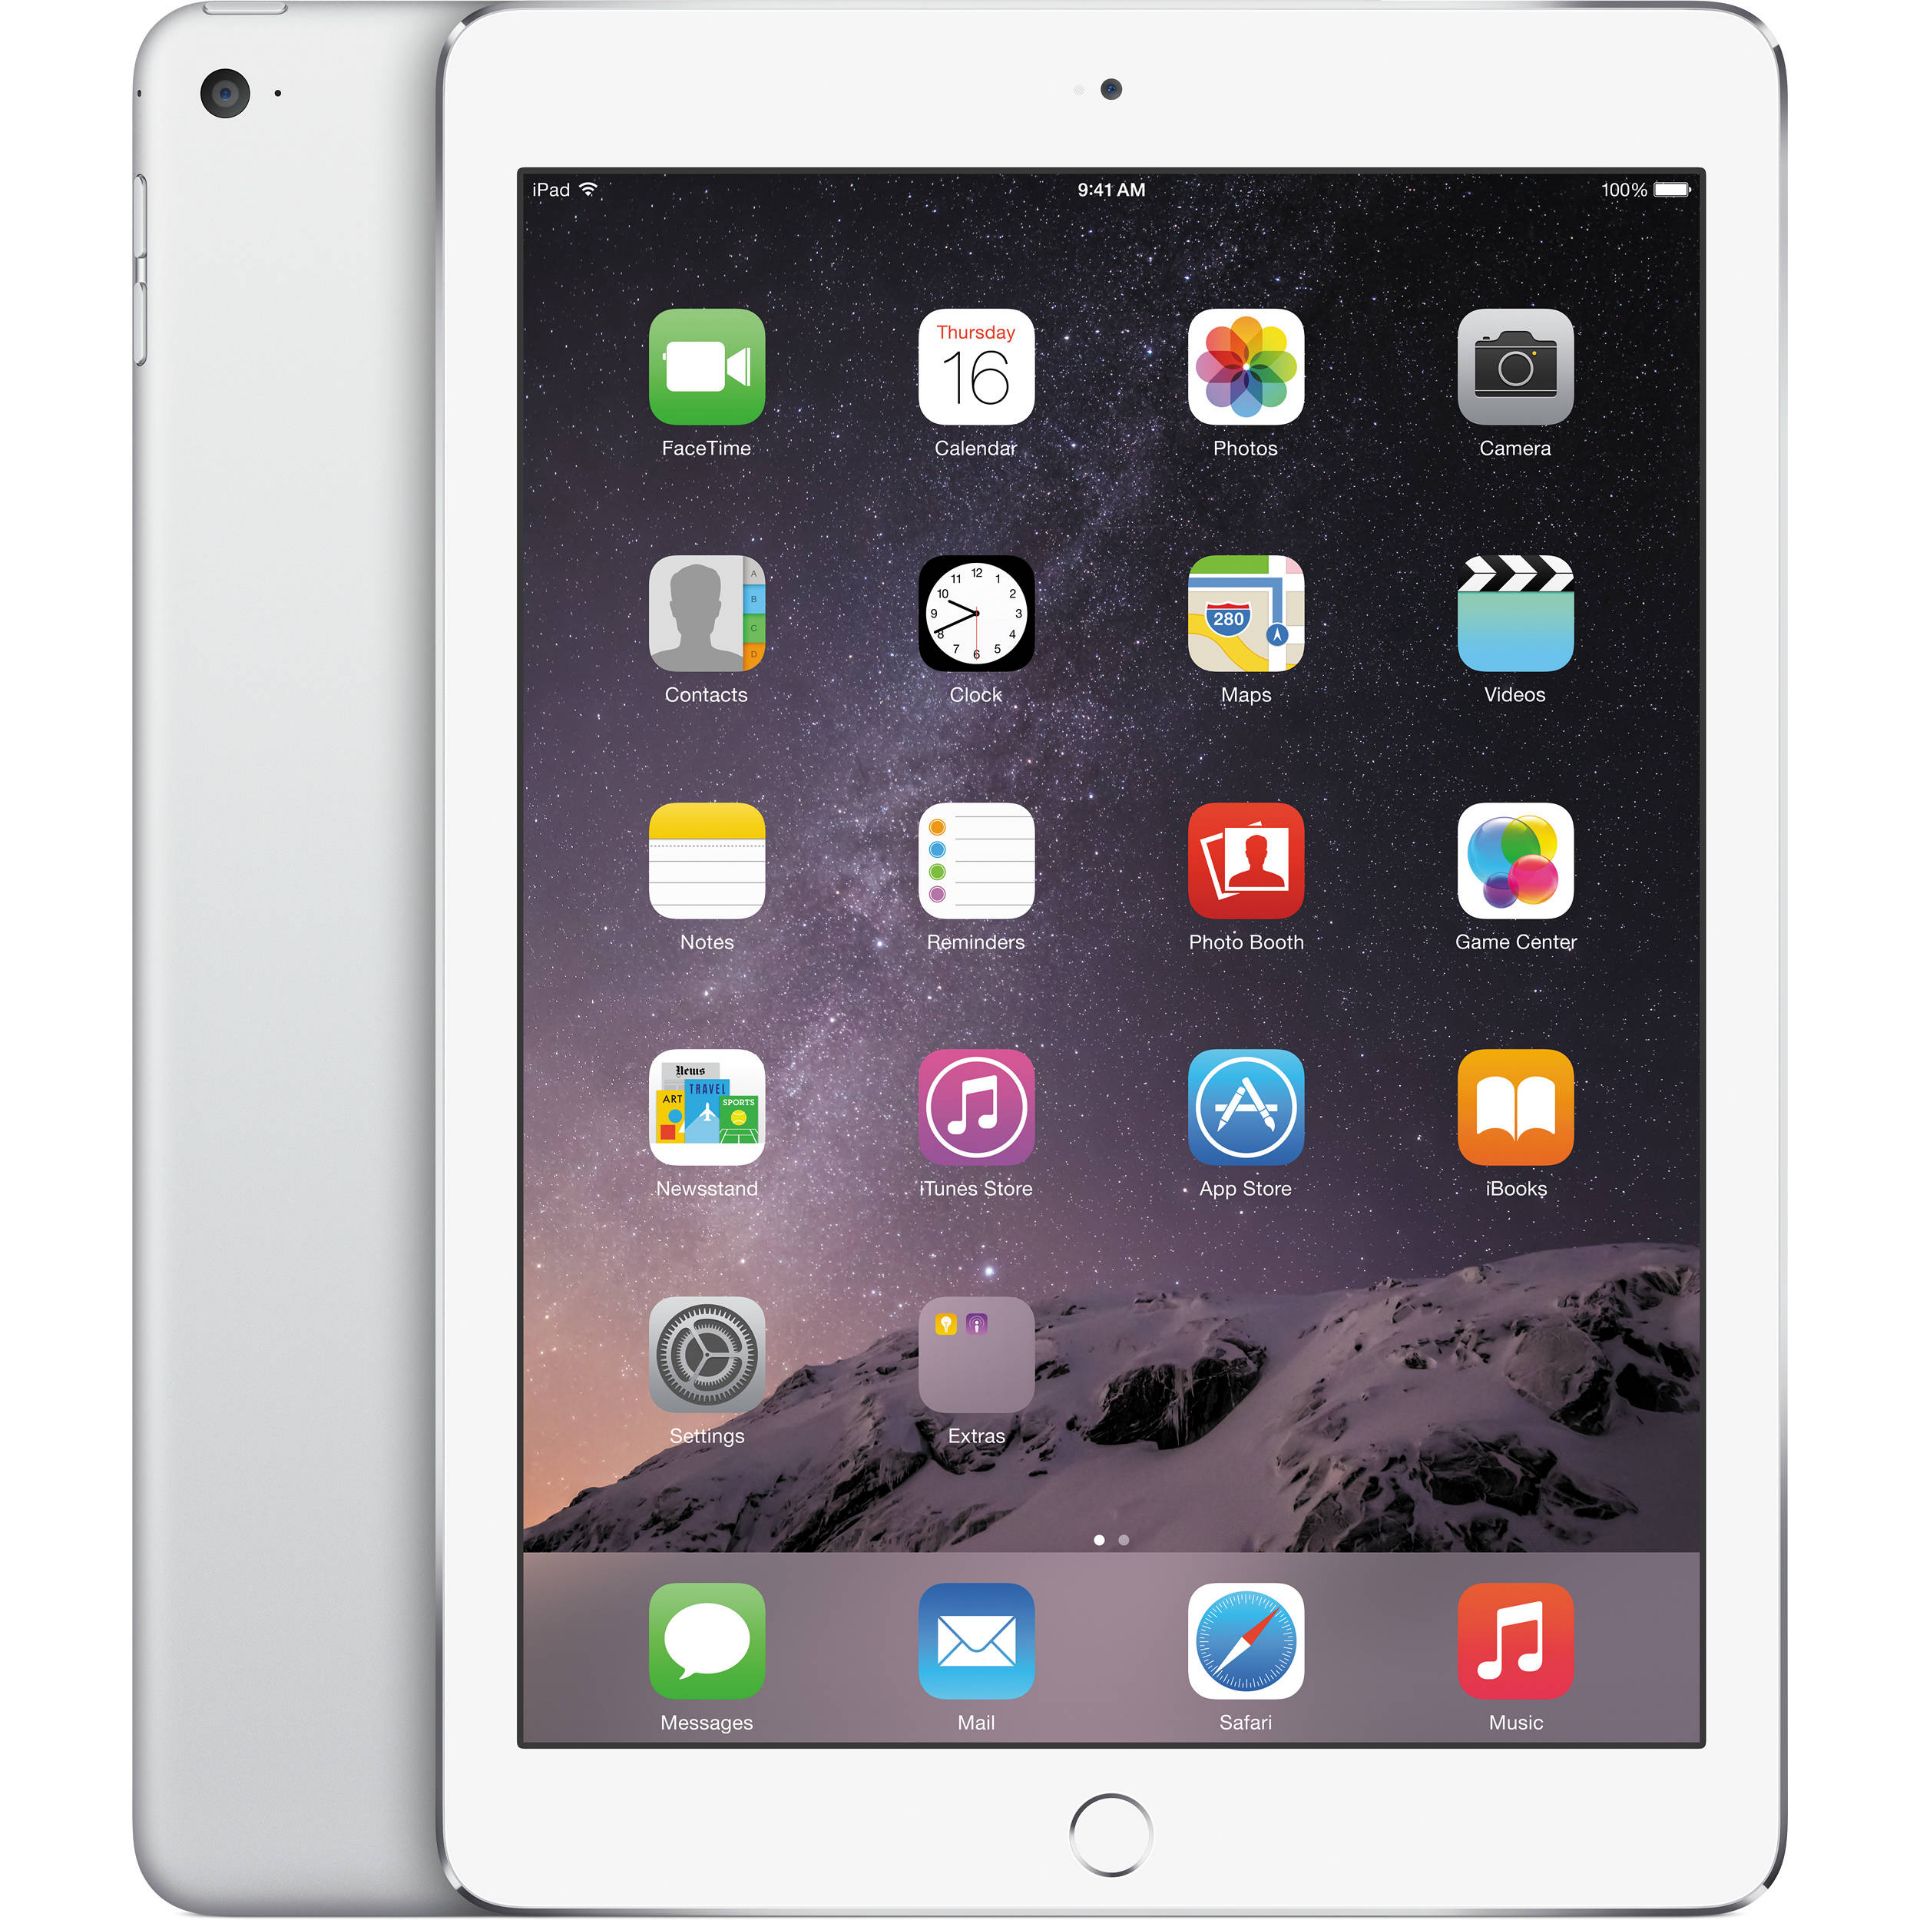 V Grade A Apple iPad Air 2 64GB Silver - Wi-Fi - In Generic Box - With Apple Accessories